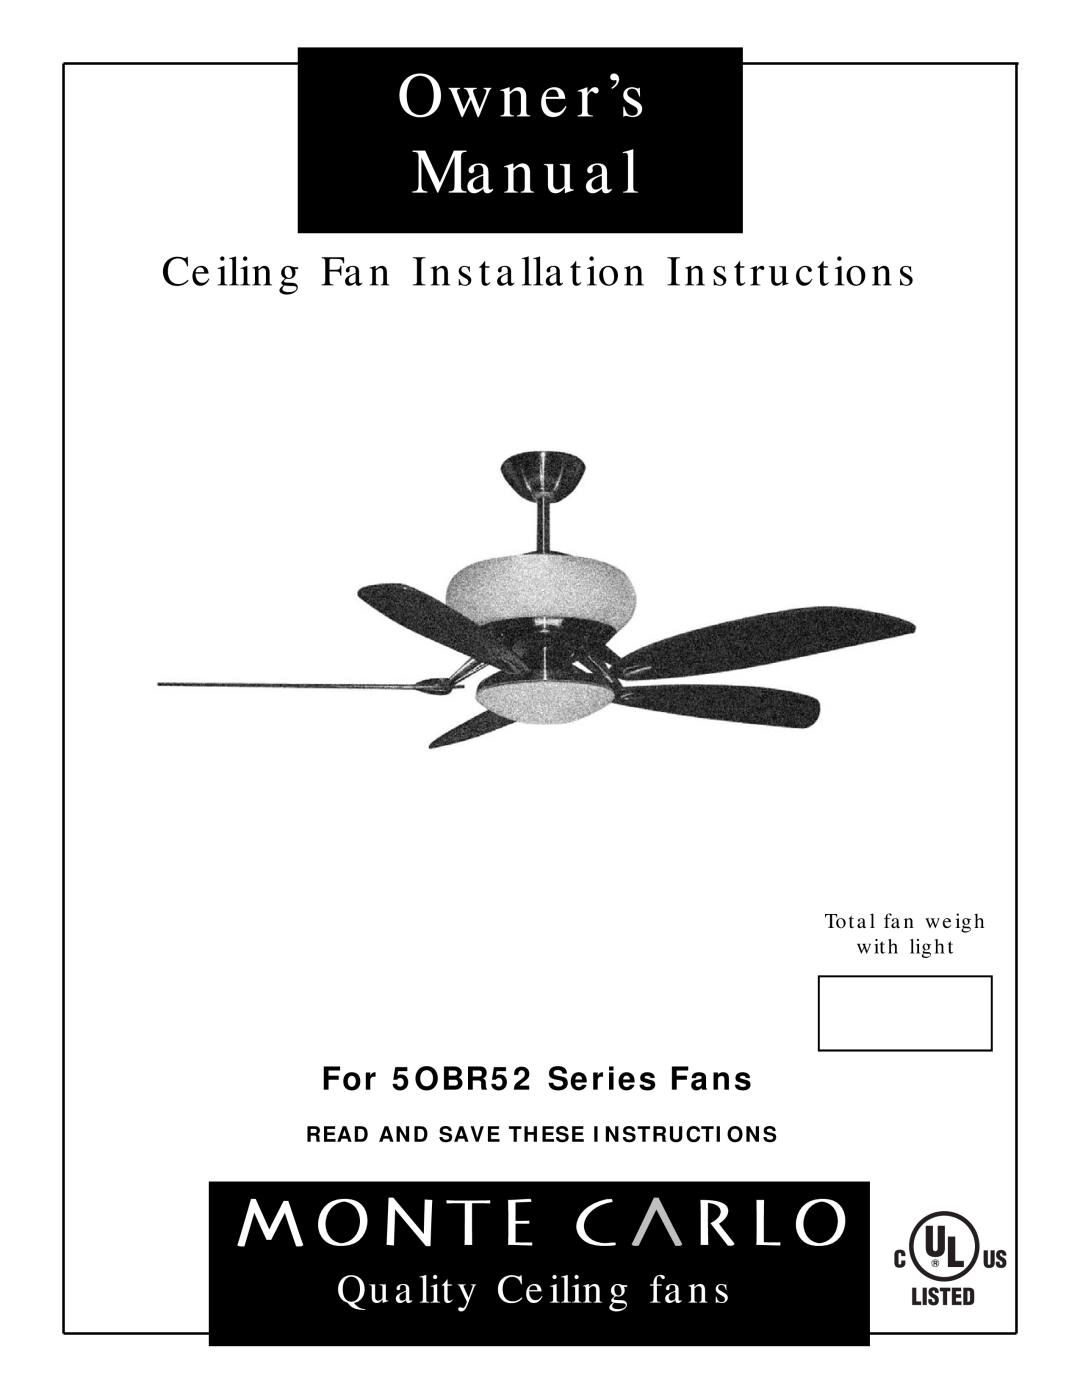 Monte Carlo Fan Company 5OBR52 owner manual Ceiling Fan Installation Instructions, Quality Ceiling fans 